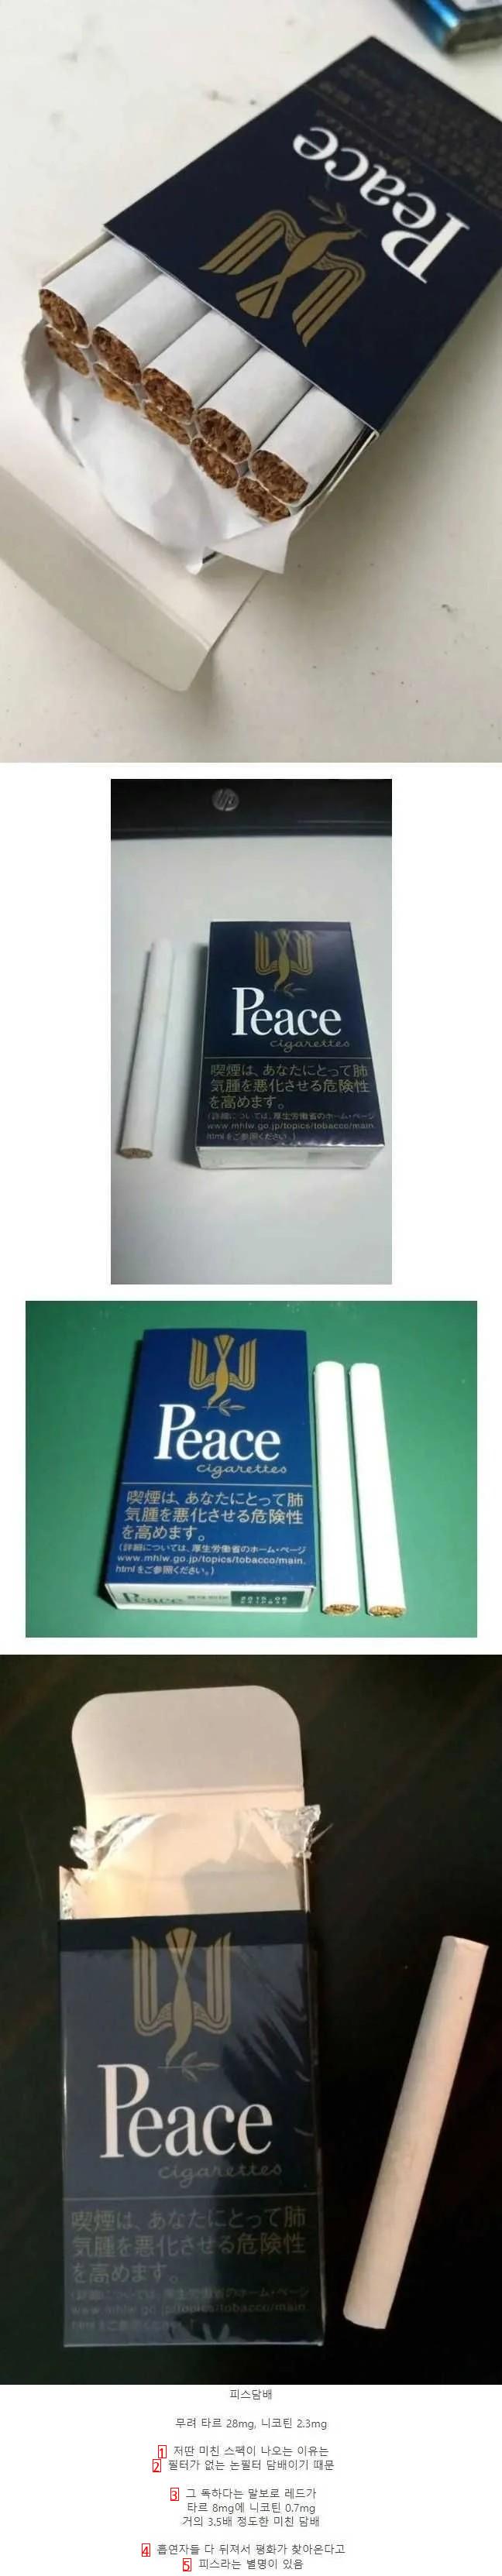 a cigarette of peace made in Japan